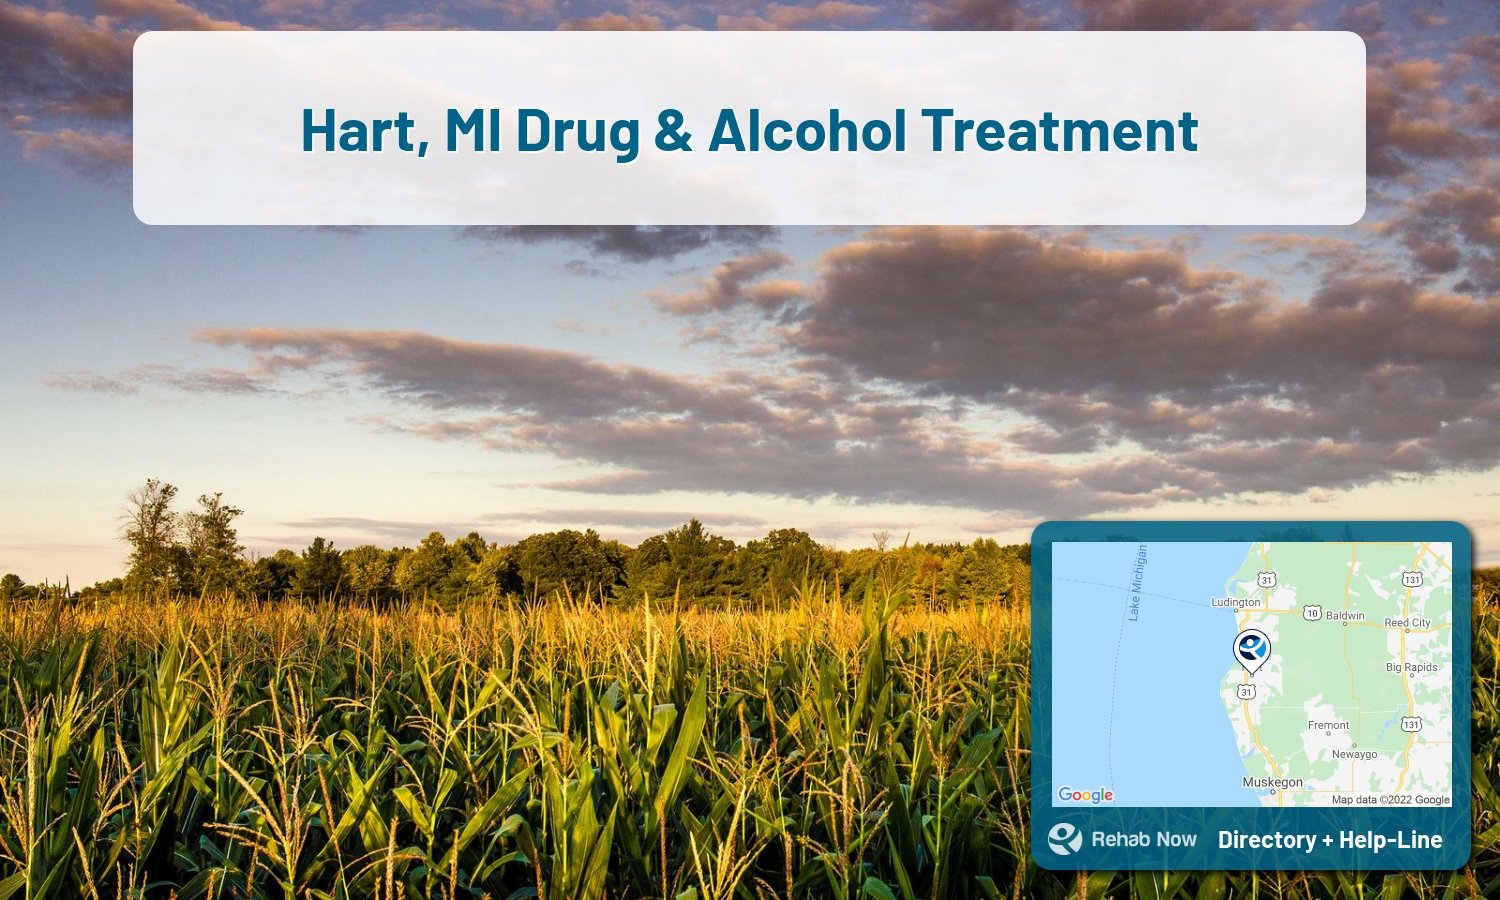 Hart, MI Treatment Centers. Find drug rehab in Hart, Michigan, or detox and treatment programs. Get the right help now!